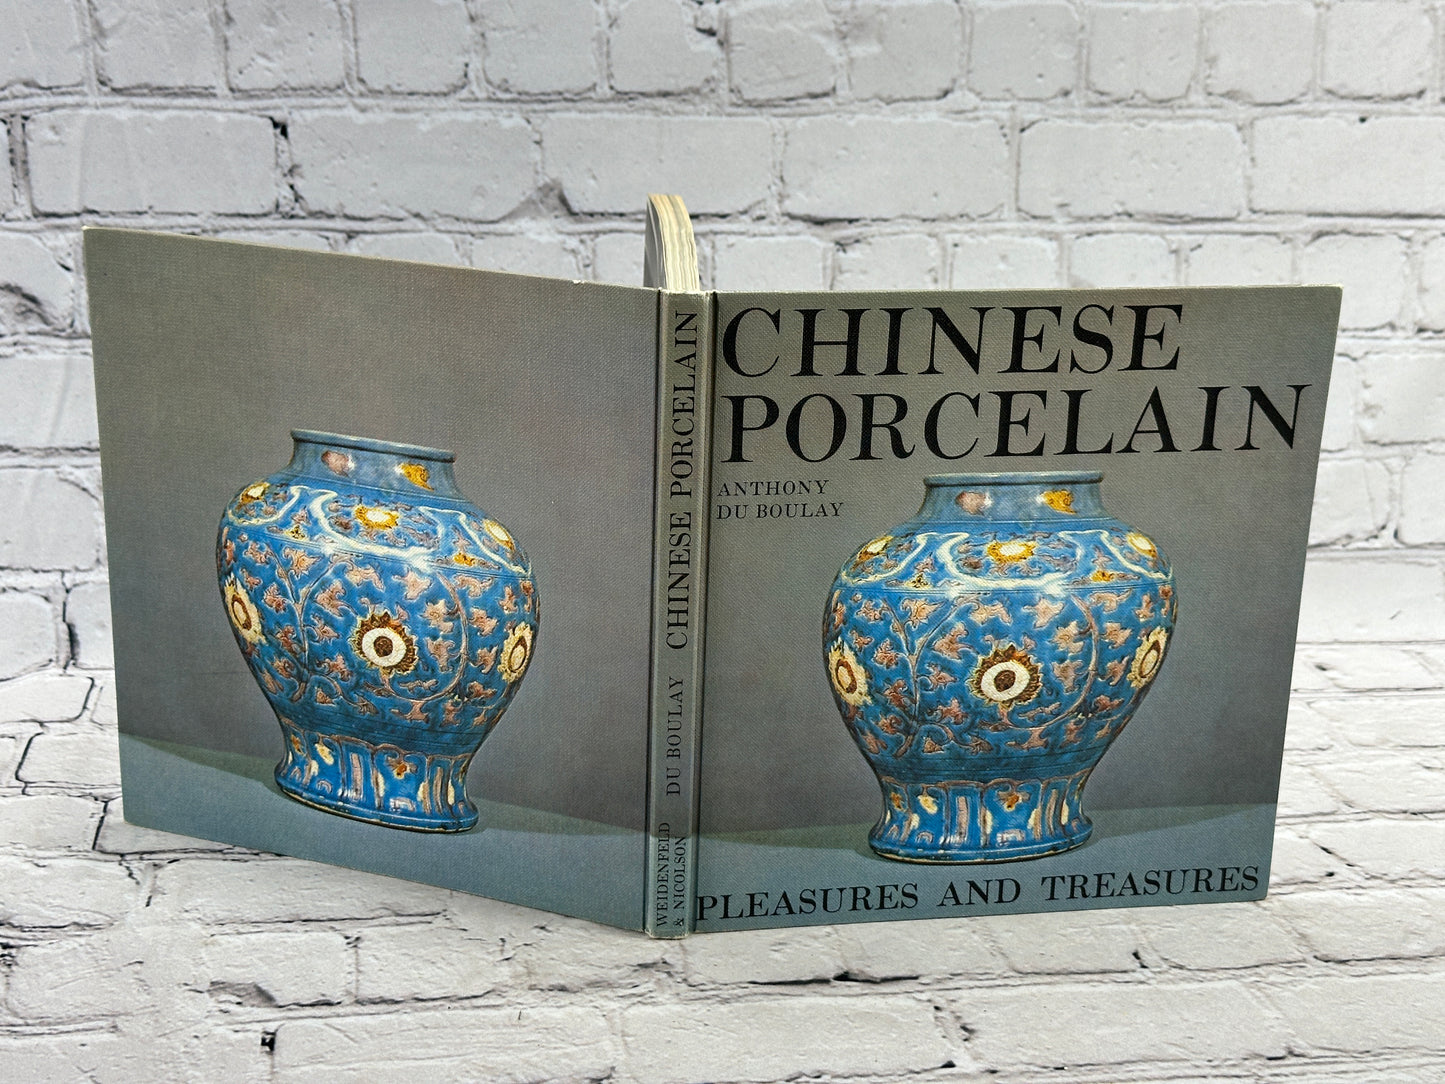 Chinese Porcelain: Pleasures and Treasures by Anthony Du Boulay [1965]